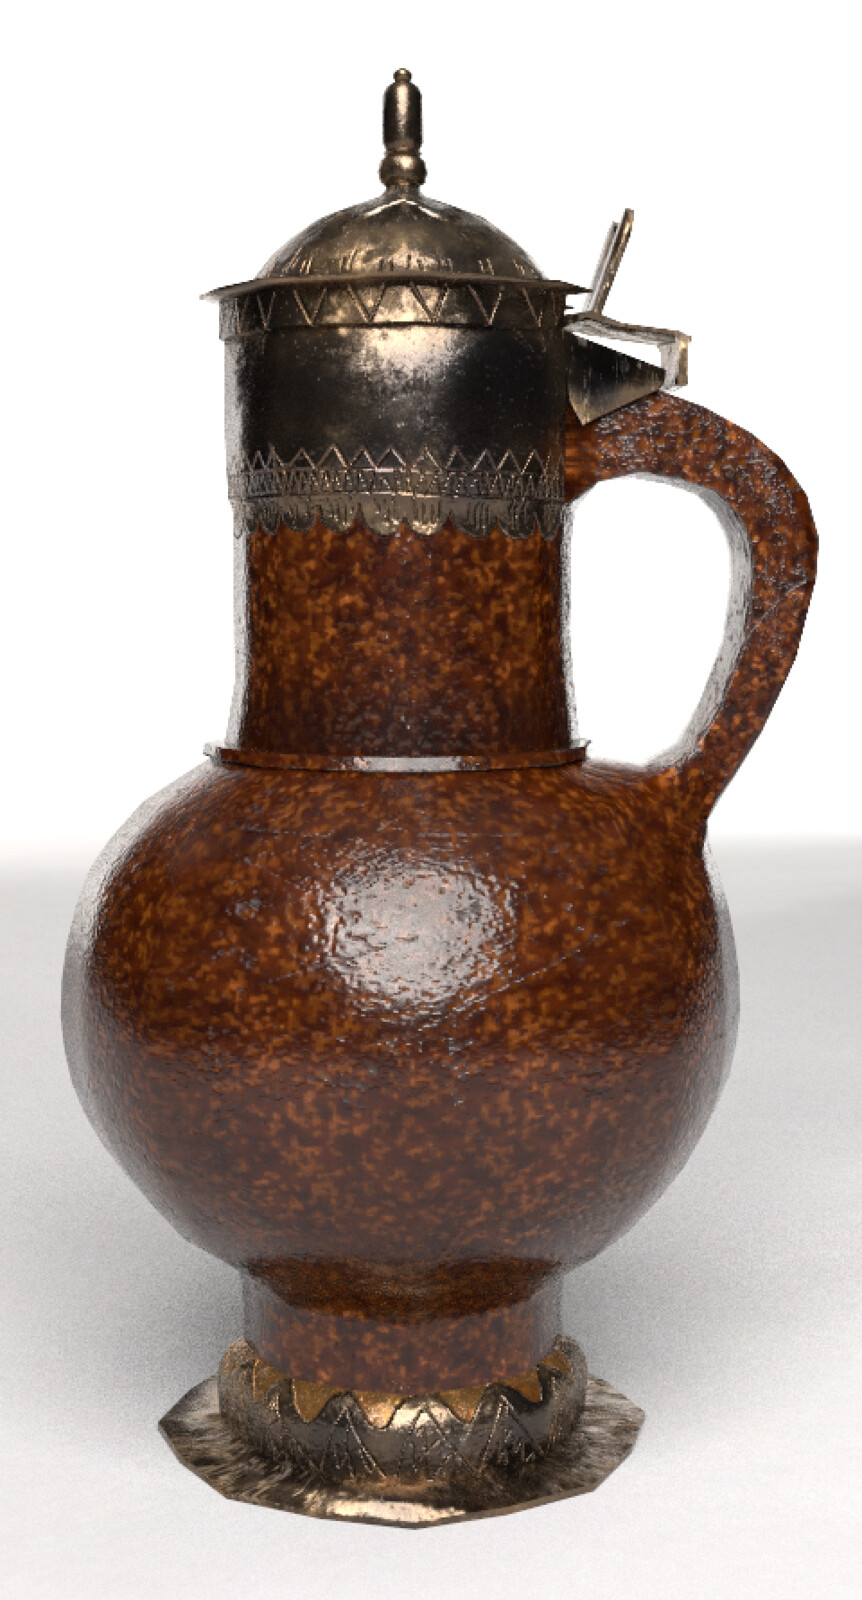 Model of a late-16th century Rhenish stoneware jug with silver mounts. 